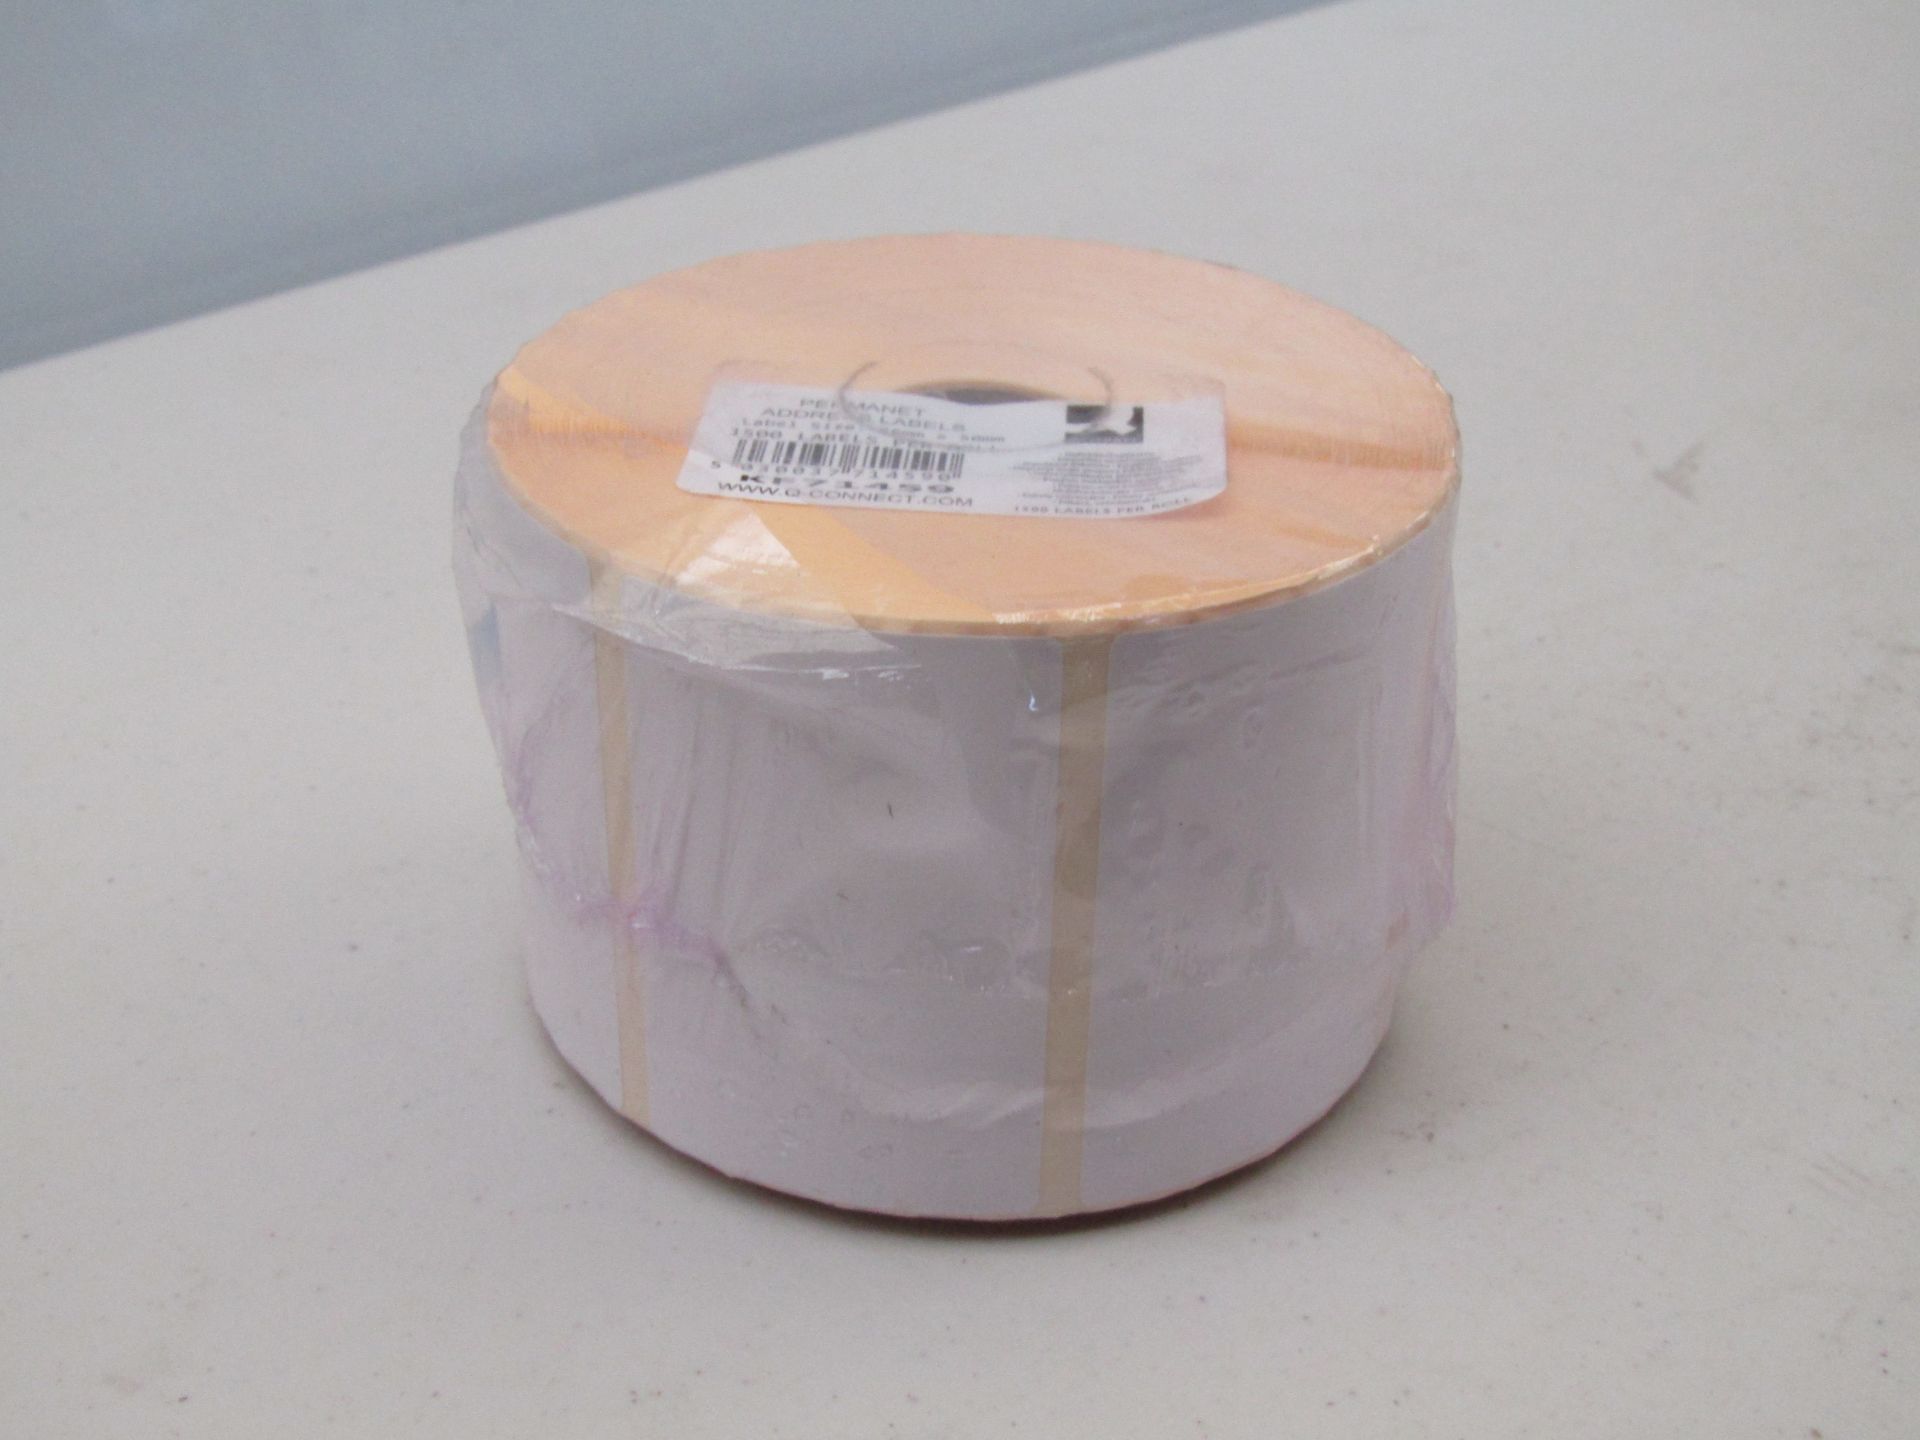 Large box containing approx. 25 rolls of Q-Connect Permanent Address labels. 1500 labels per roll.